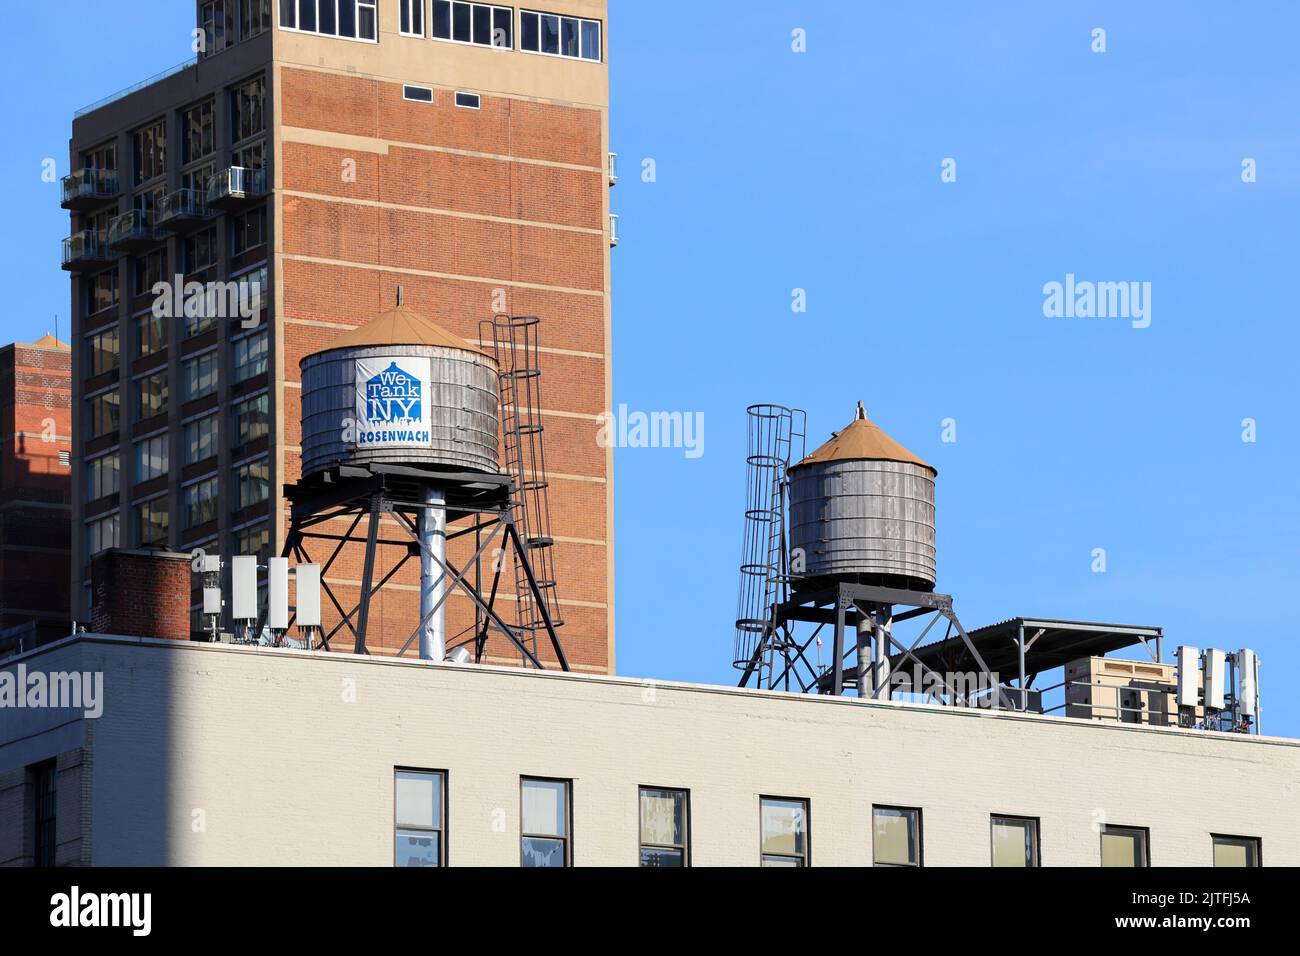 Rosenwach wood water tanks on a New York City rooftop. Water tanks are used to store water to maintain water pressure in a building. Stock Photo